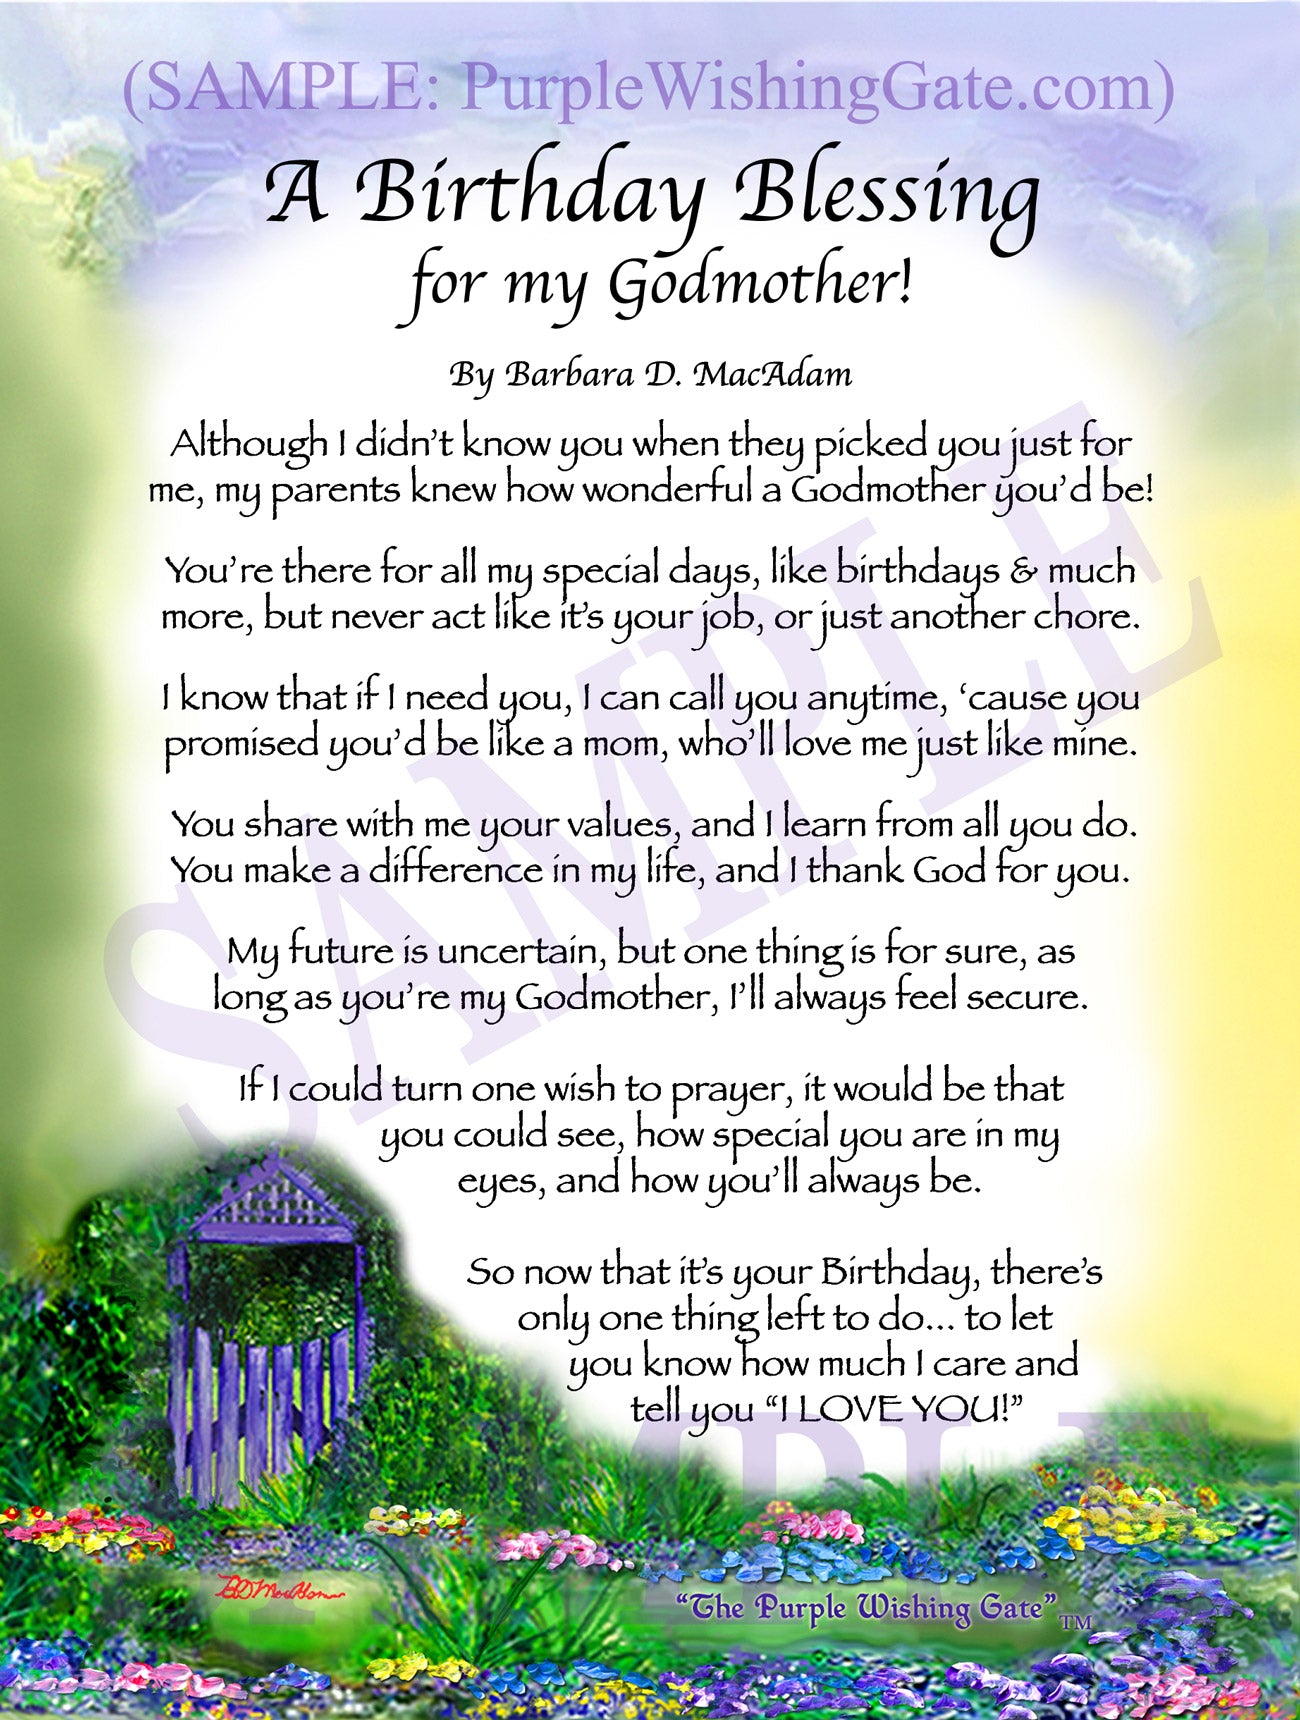 
              
        		A Birthday Blessing for my Godmother! - Birthday Gift - PurpleWishingGate.com
        		
        	